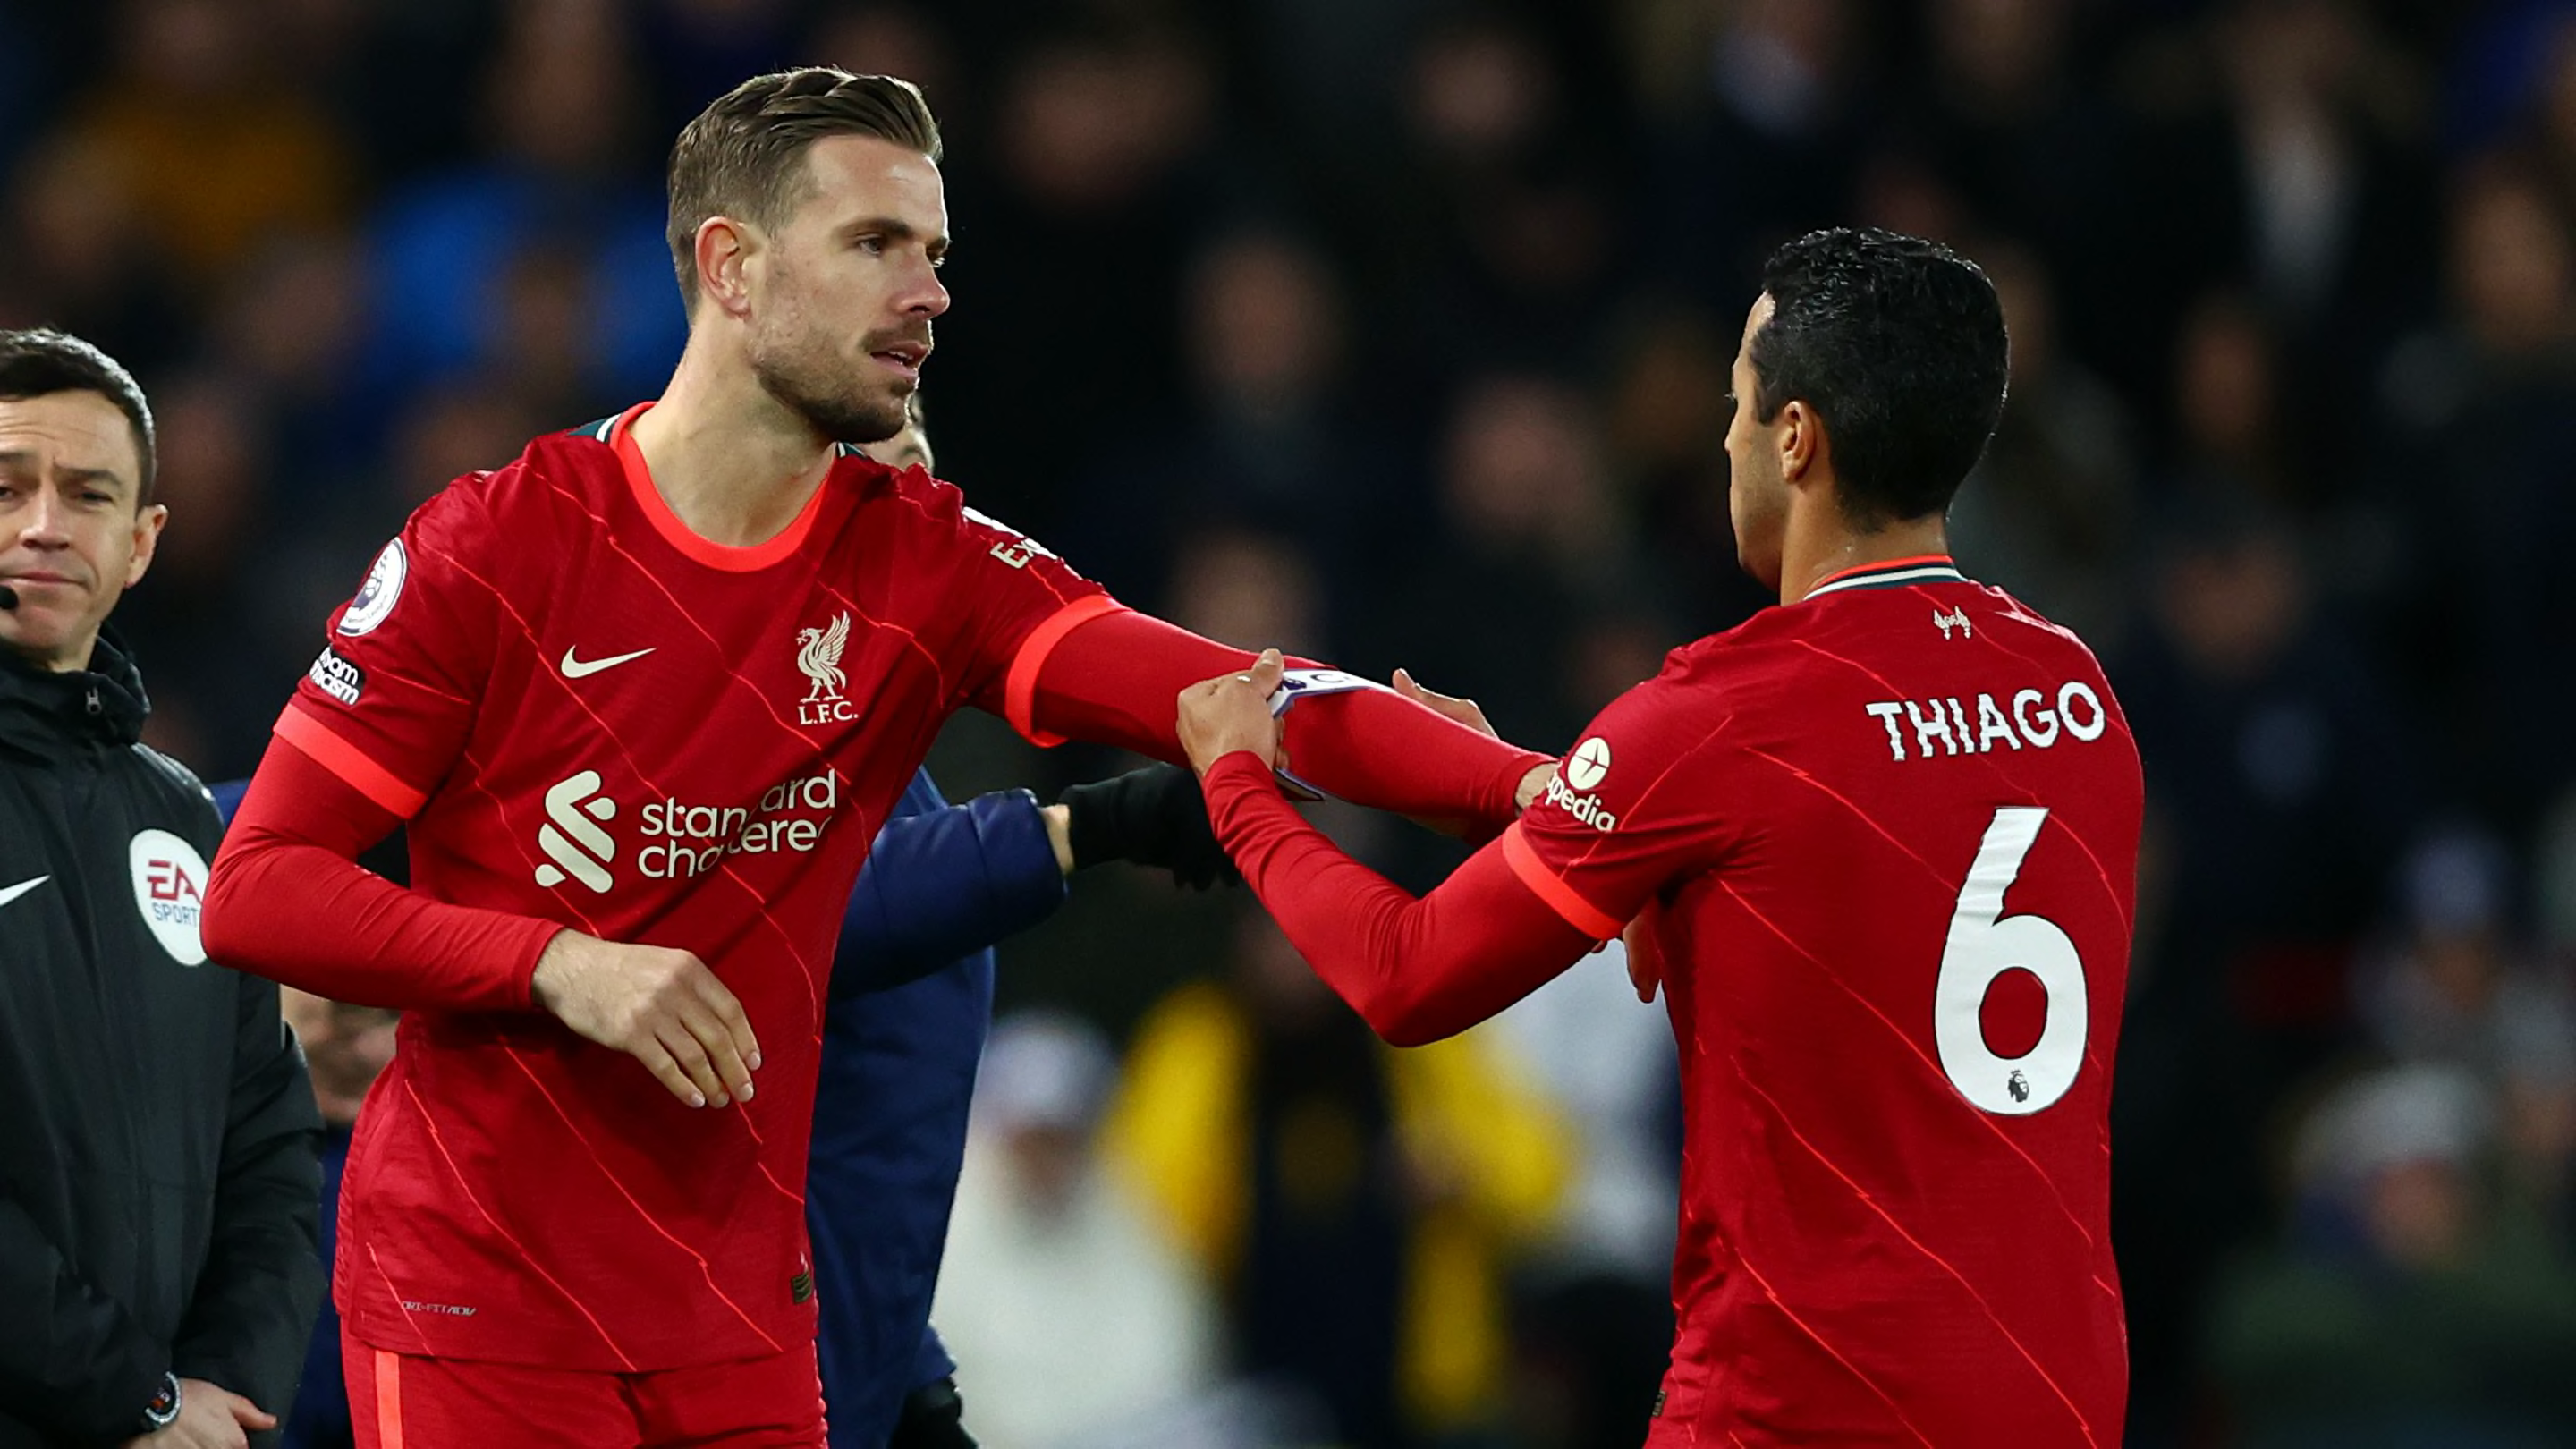 Thiago hails Jordan Henderson as 'one of the best midfielders I've played with'